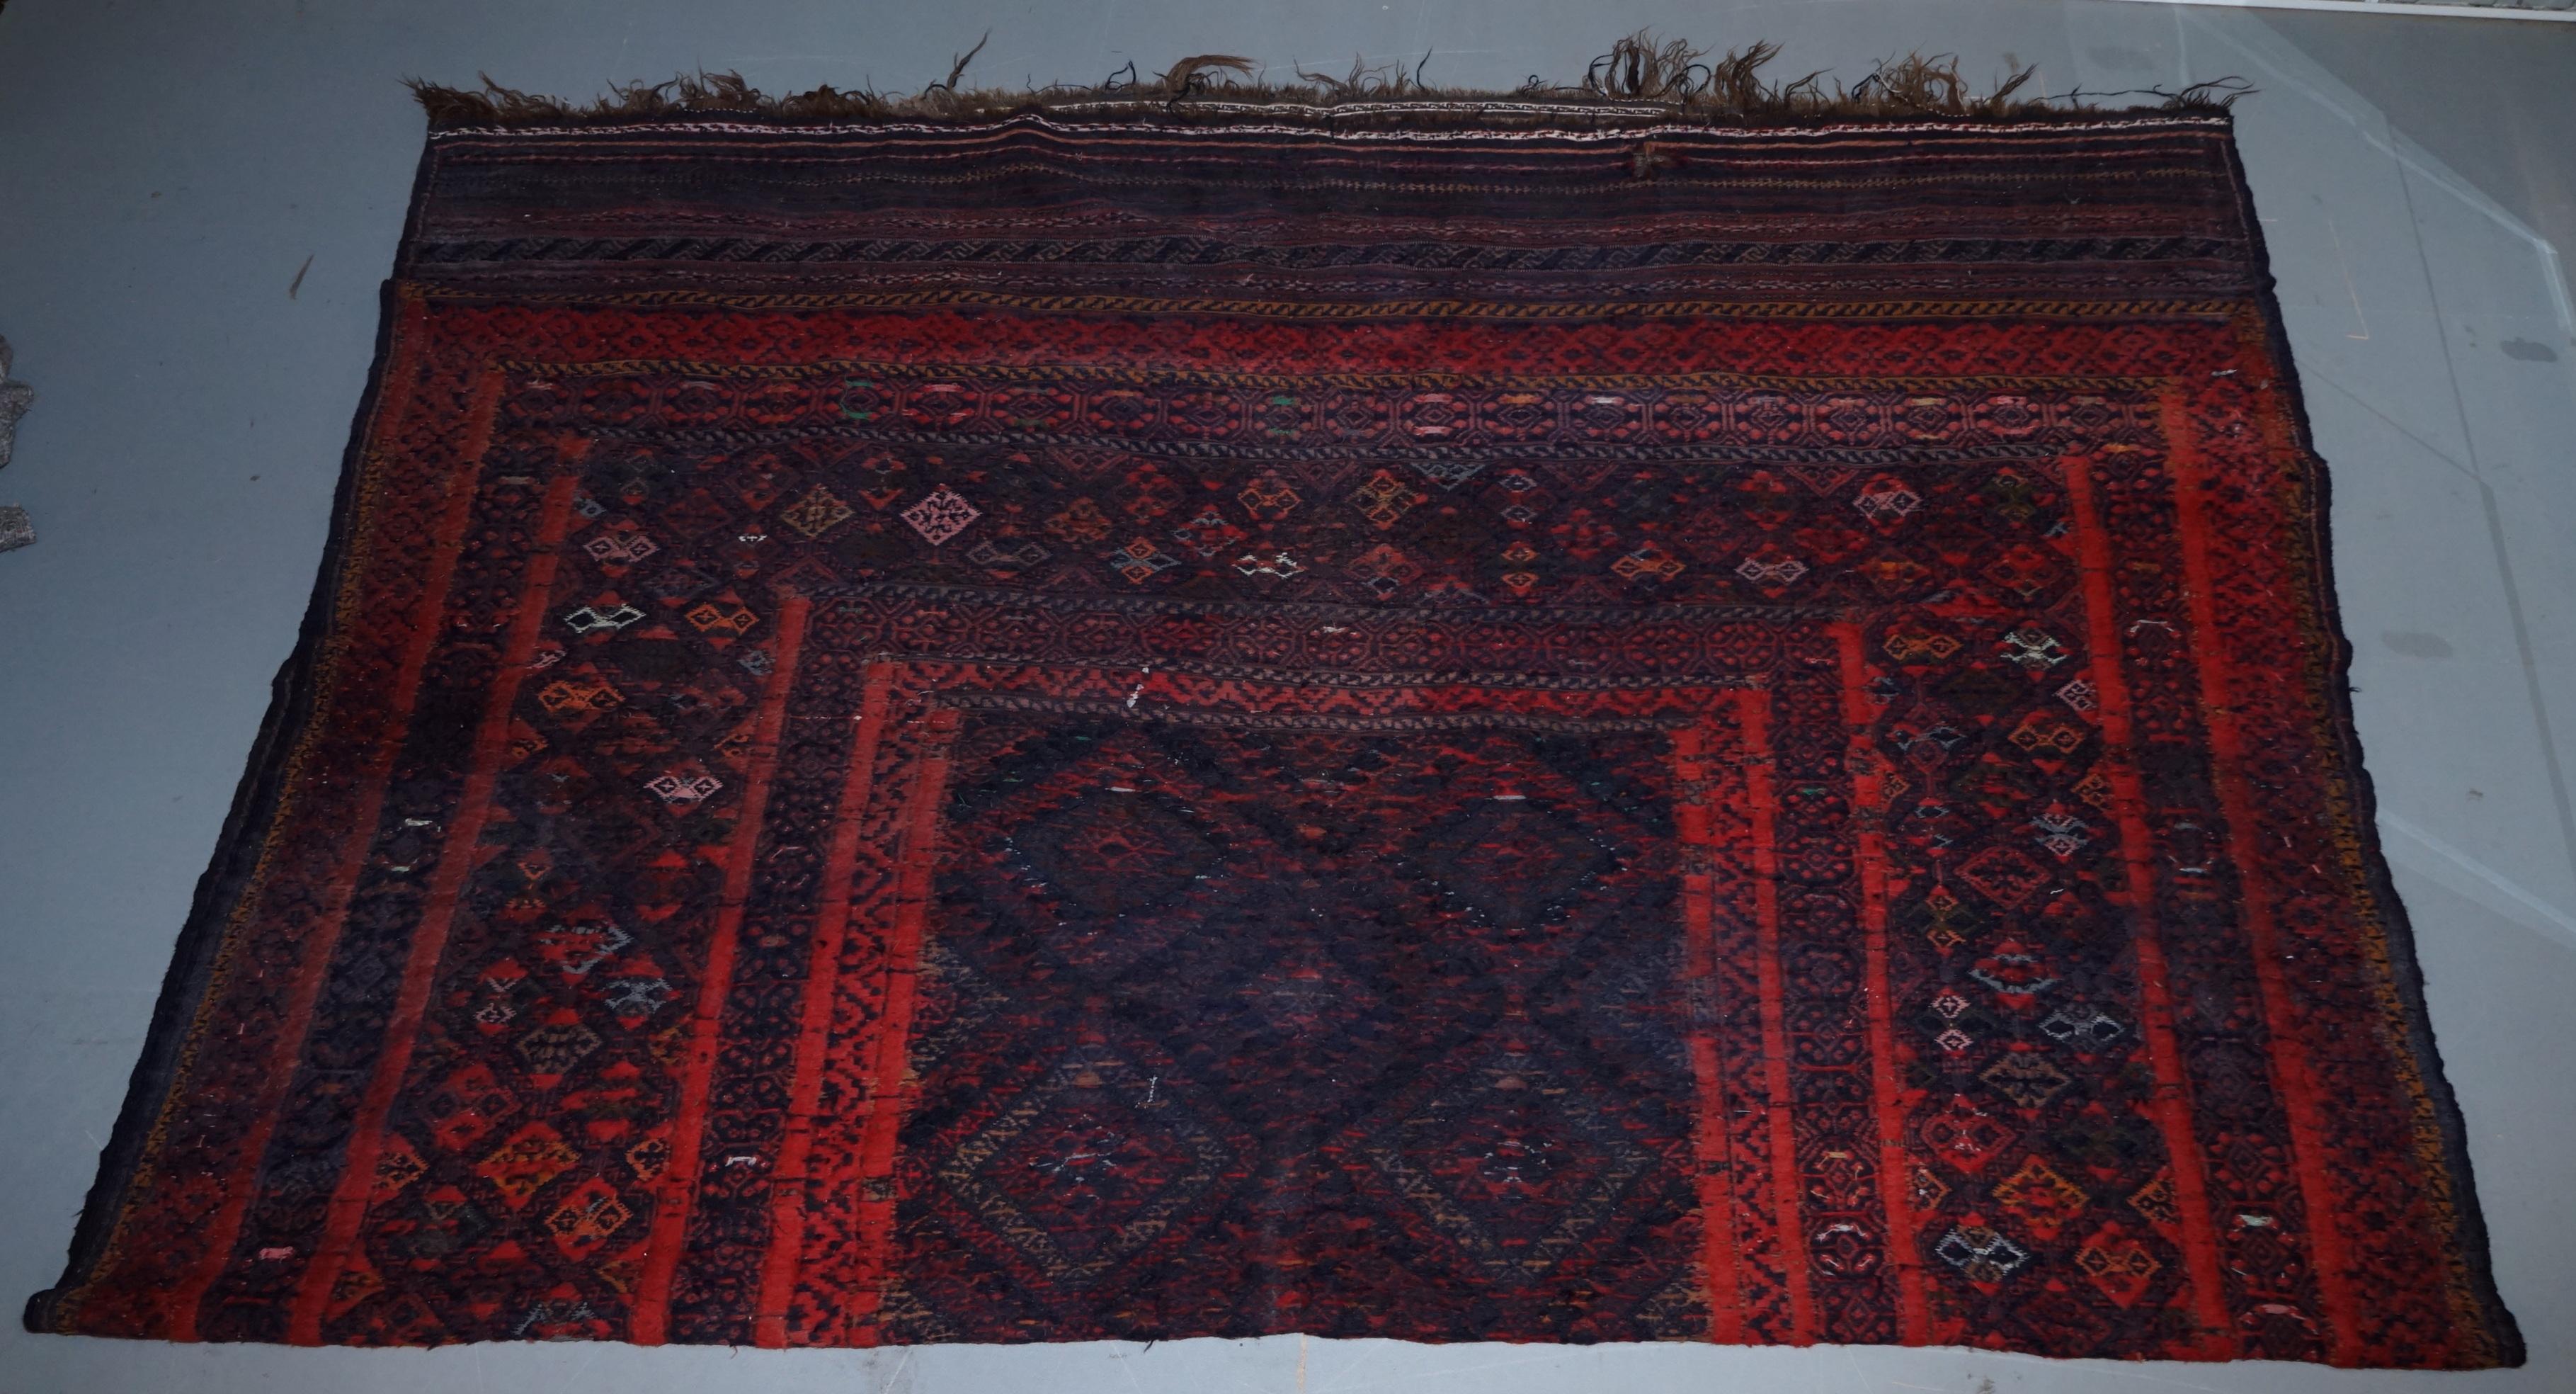 Very Old Worn Antique Kilim Large Floor Rug Hand Knotted and Woven 7